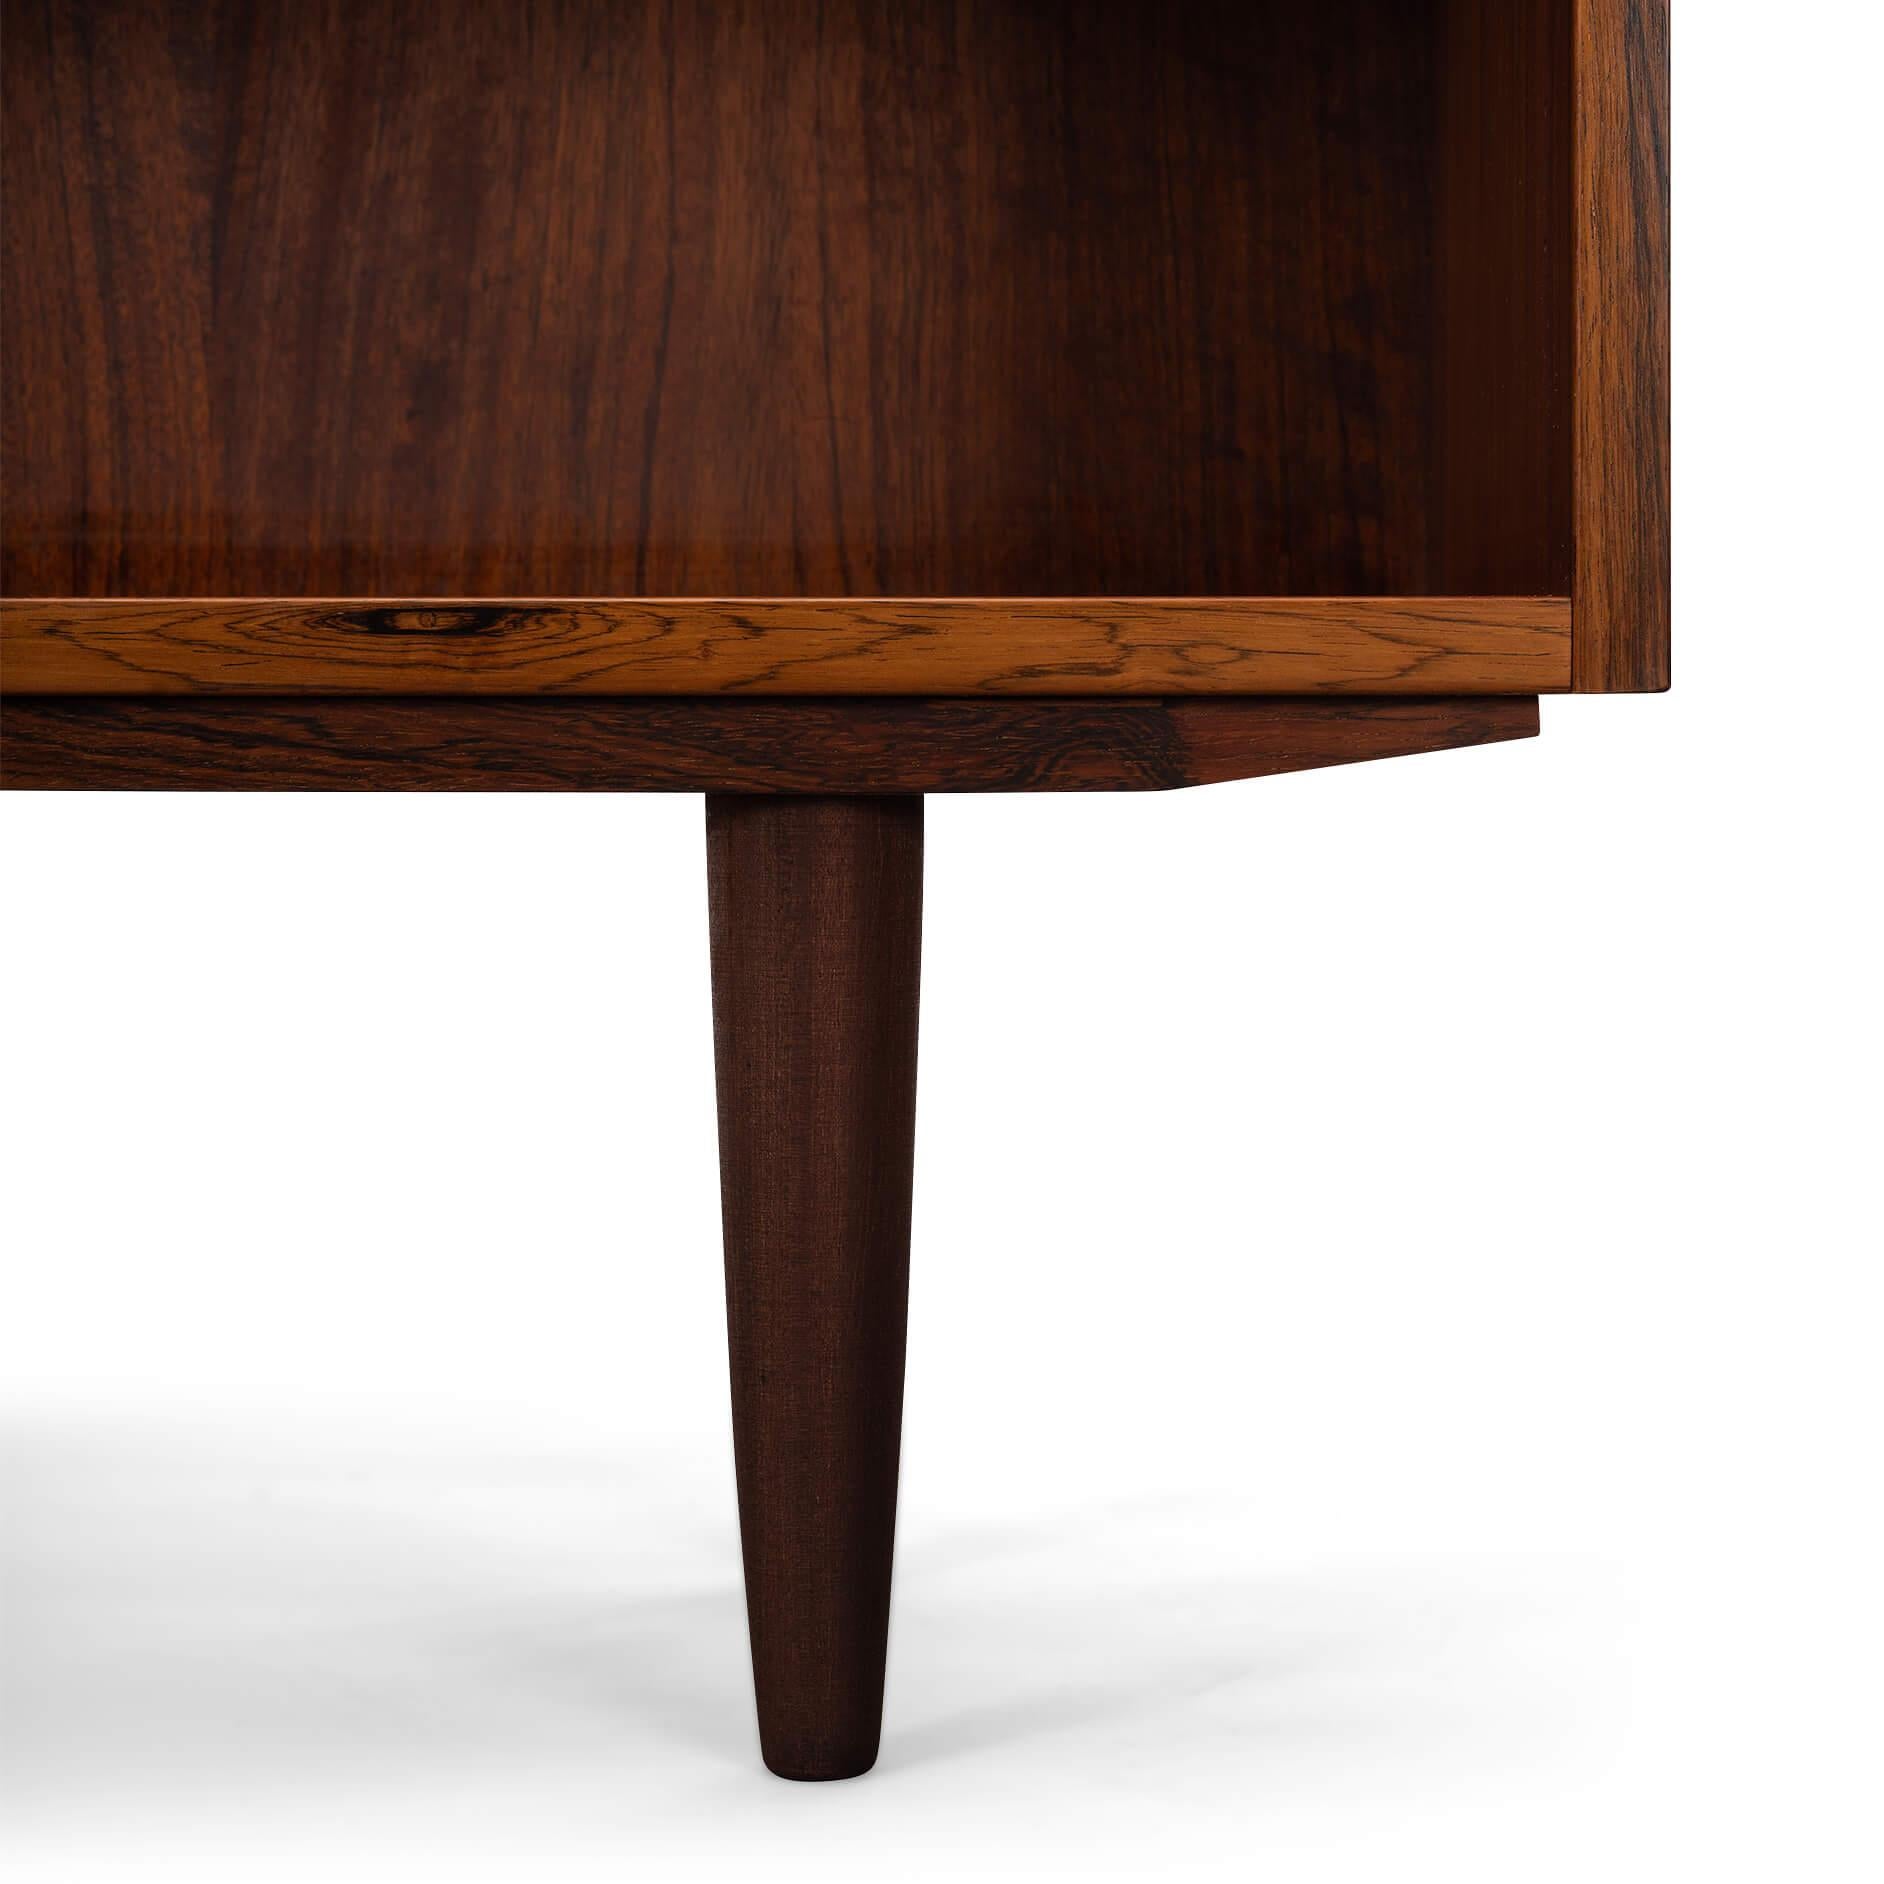 Danish Low Rosewood Bookcase by Carlo Jensen for Hundevad & Co, 1960s For Sale